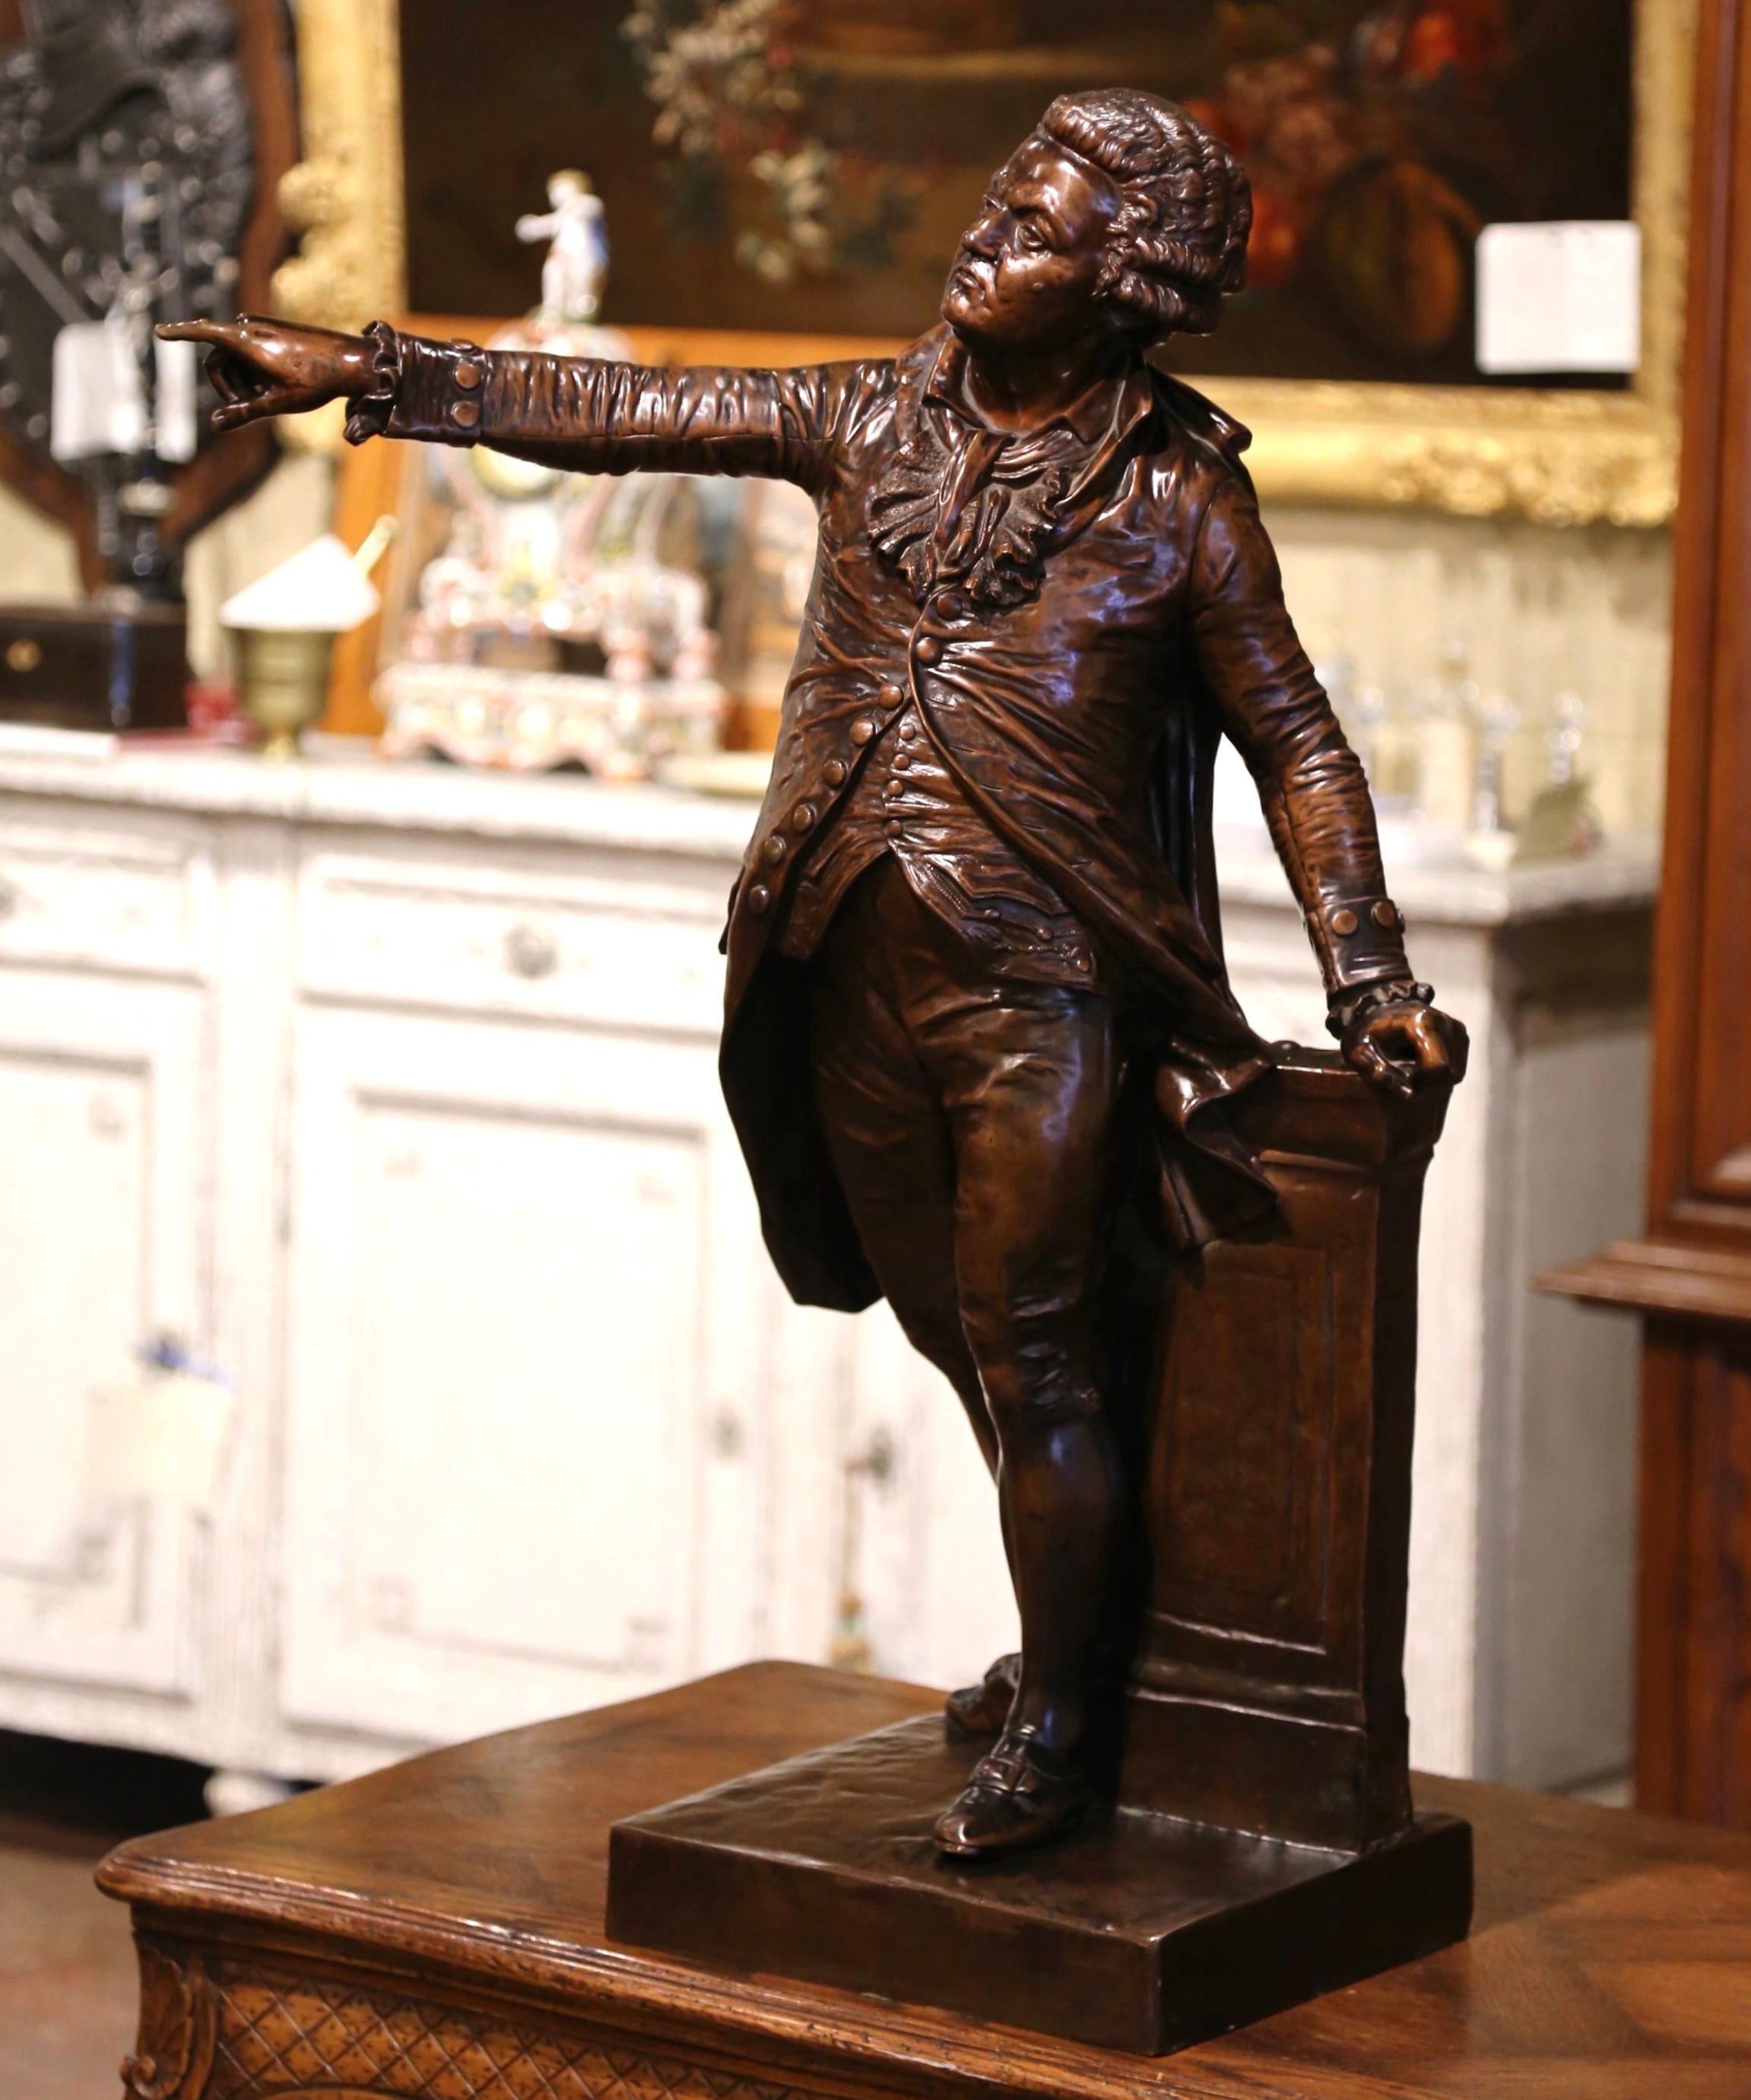 This large antique bronze sculpture was crafted in France; the bronze figure depicts the French politician Mirabeau and is signed, stamped and dated on the base by Francois Joseph A. Truphene, 1857. This very detailed work of art is in excellent